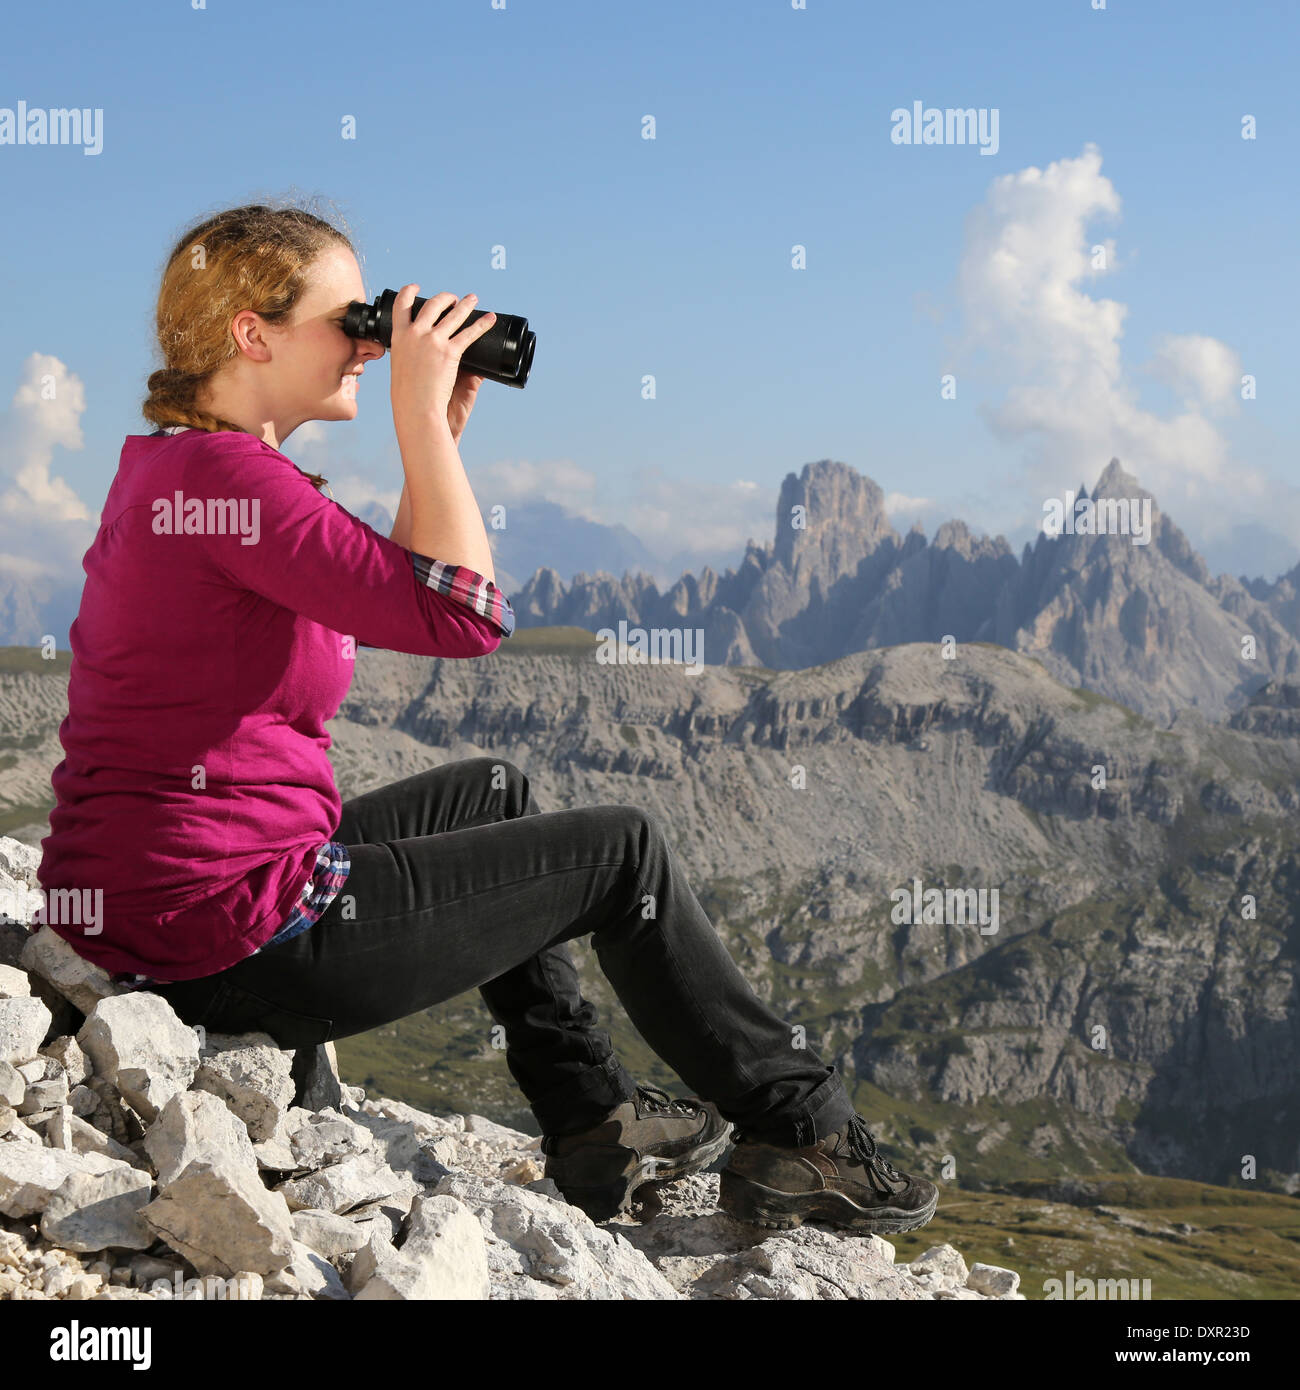 A young woman is watching the landscape in the mountains through binoculars Stock Photo